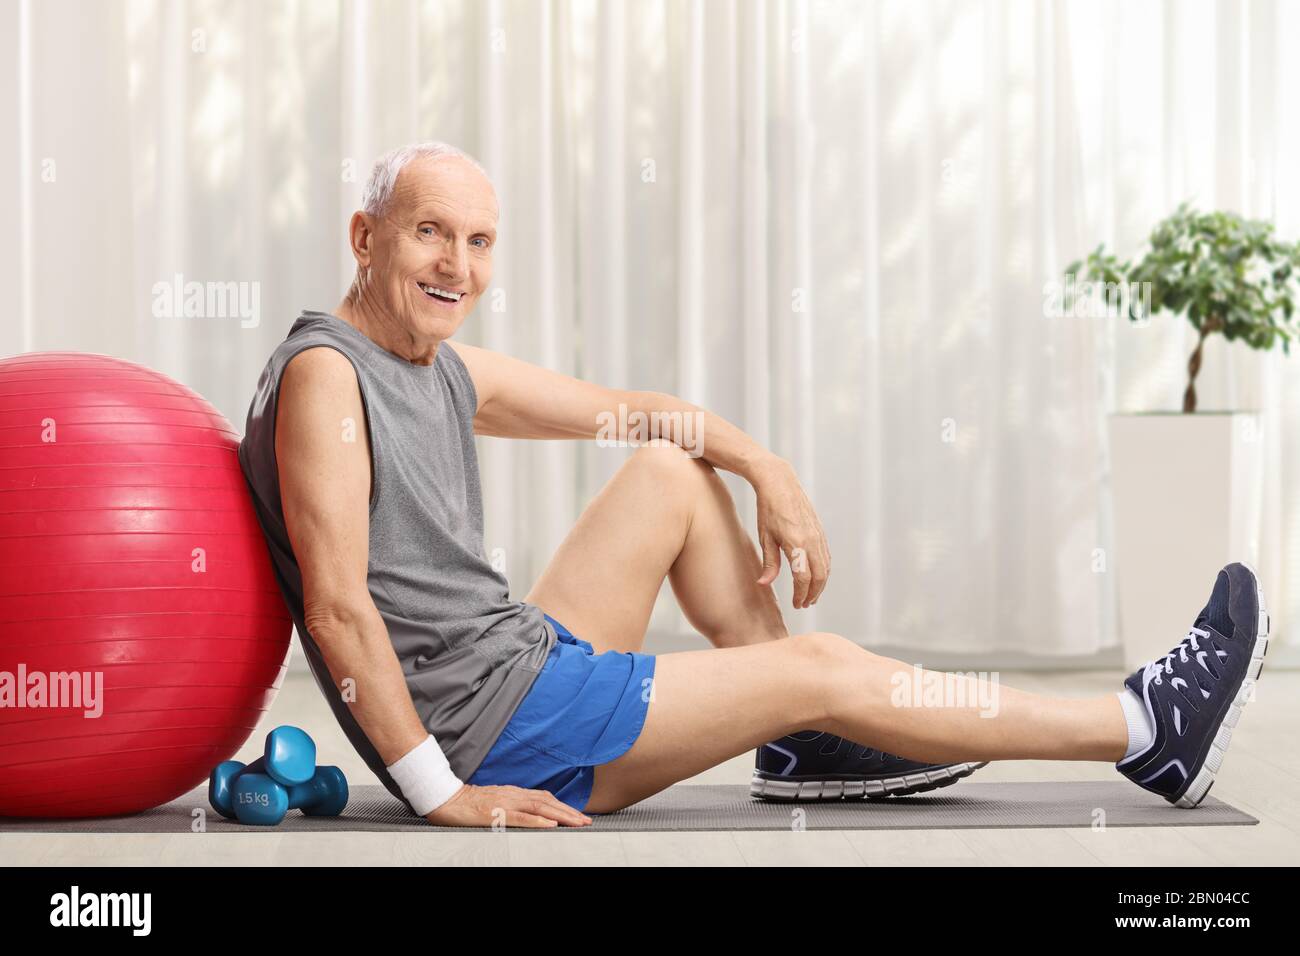 Elderly man with fitness ball and dumbbells sitting on an exercise mat at home Stock Photo